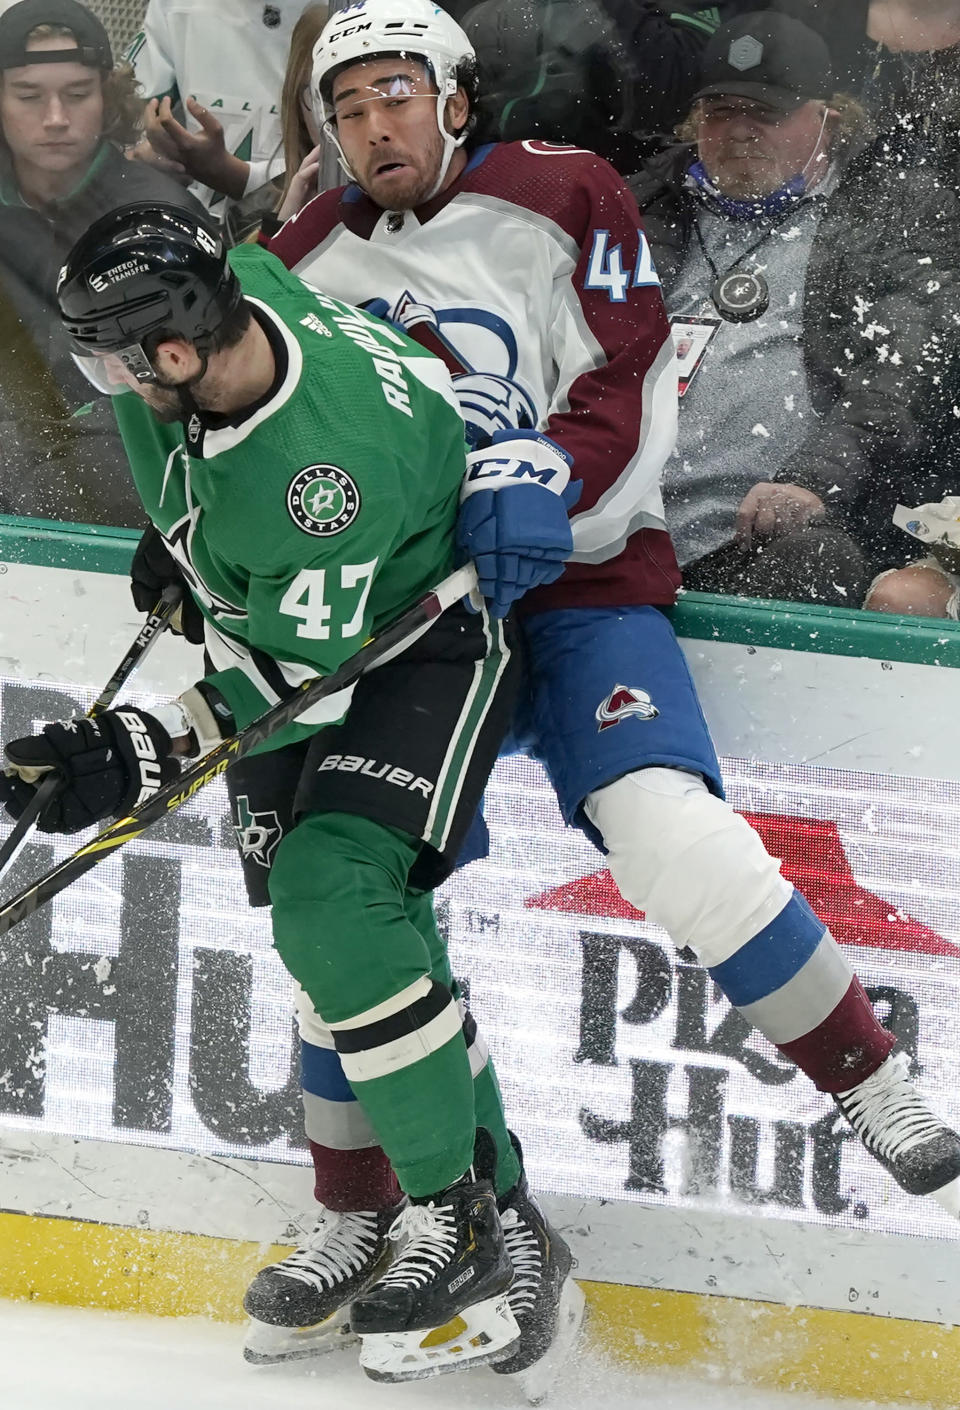 Colorado Avalanche left wing Kiefer Sherwood (44) is checked into the boards by Dallas Stars right wing Alexander Radulov (47) during the first period of an NHL hockey game in Dallas, Friday, Nov. 26, 2021. (AP Photo/LM Otero)